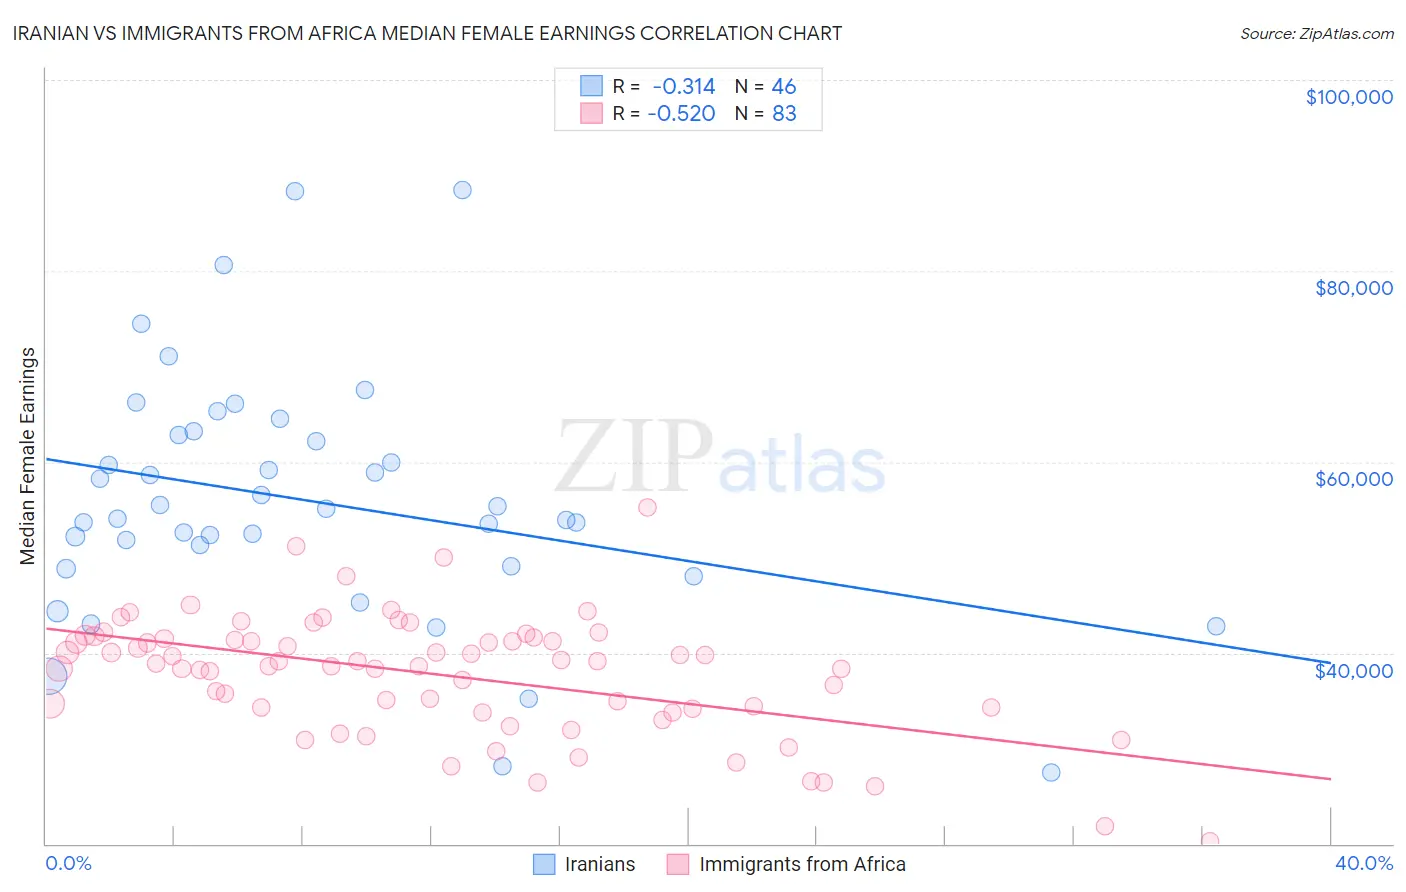 Iranian vs Immigrants from Africa Median Female Earnings